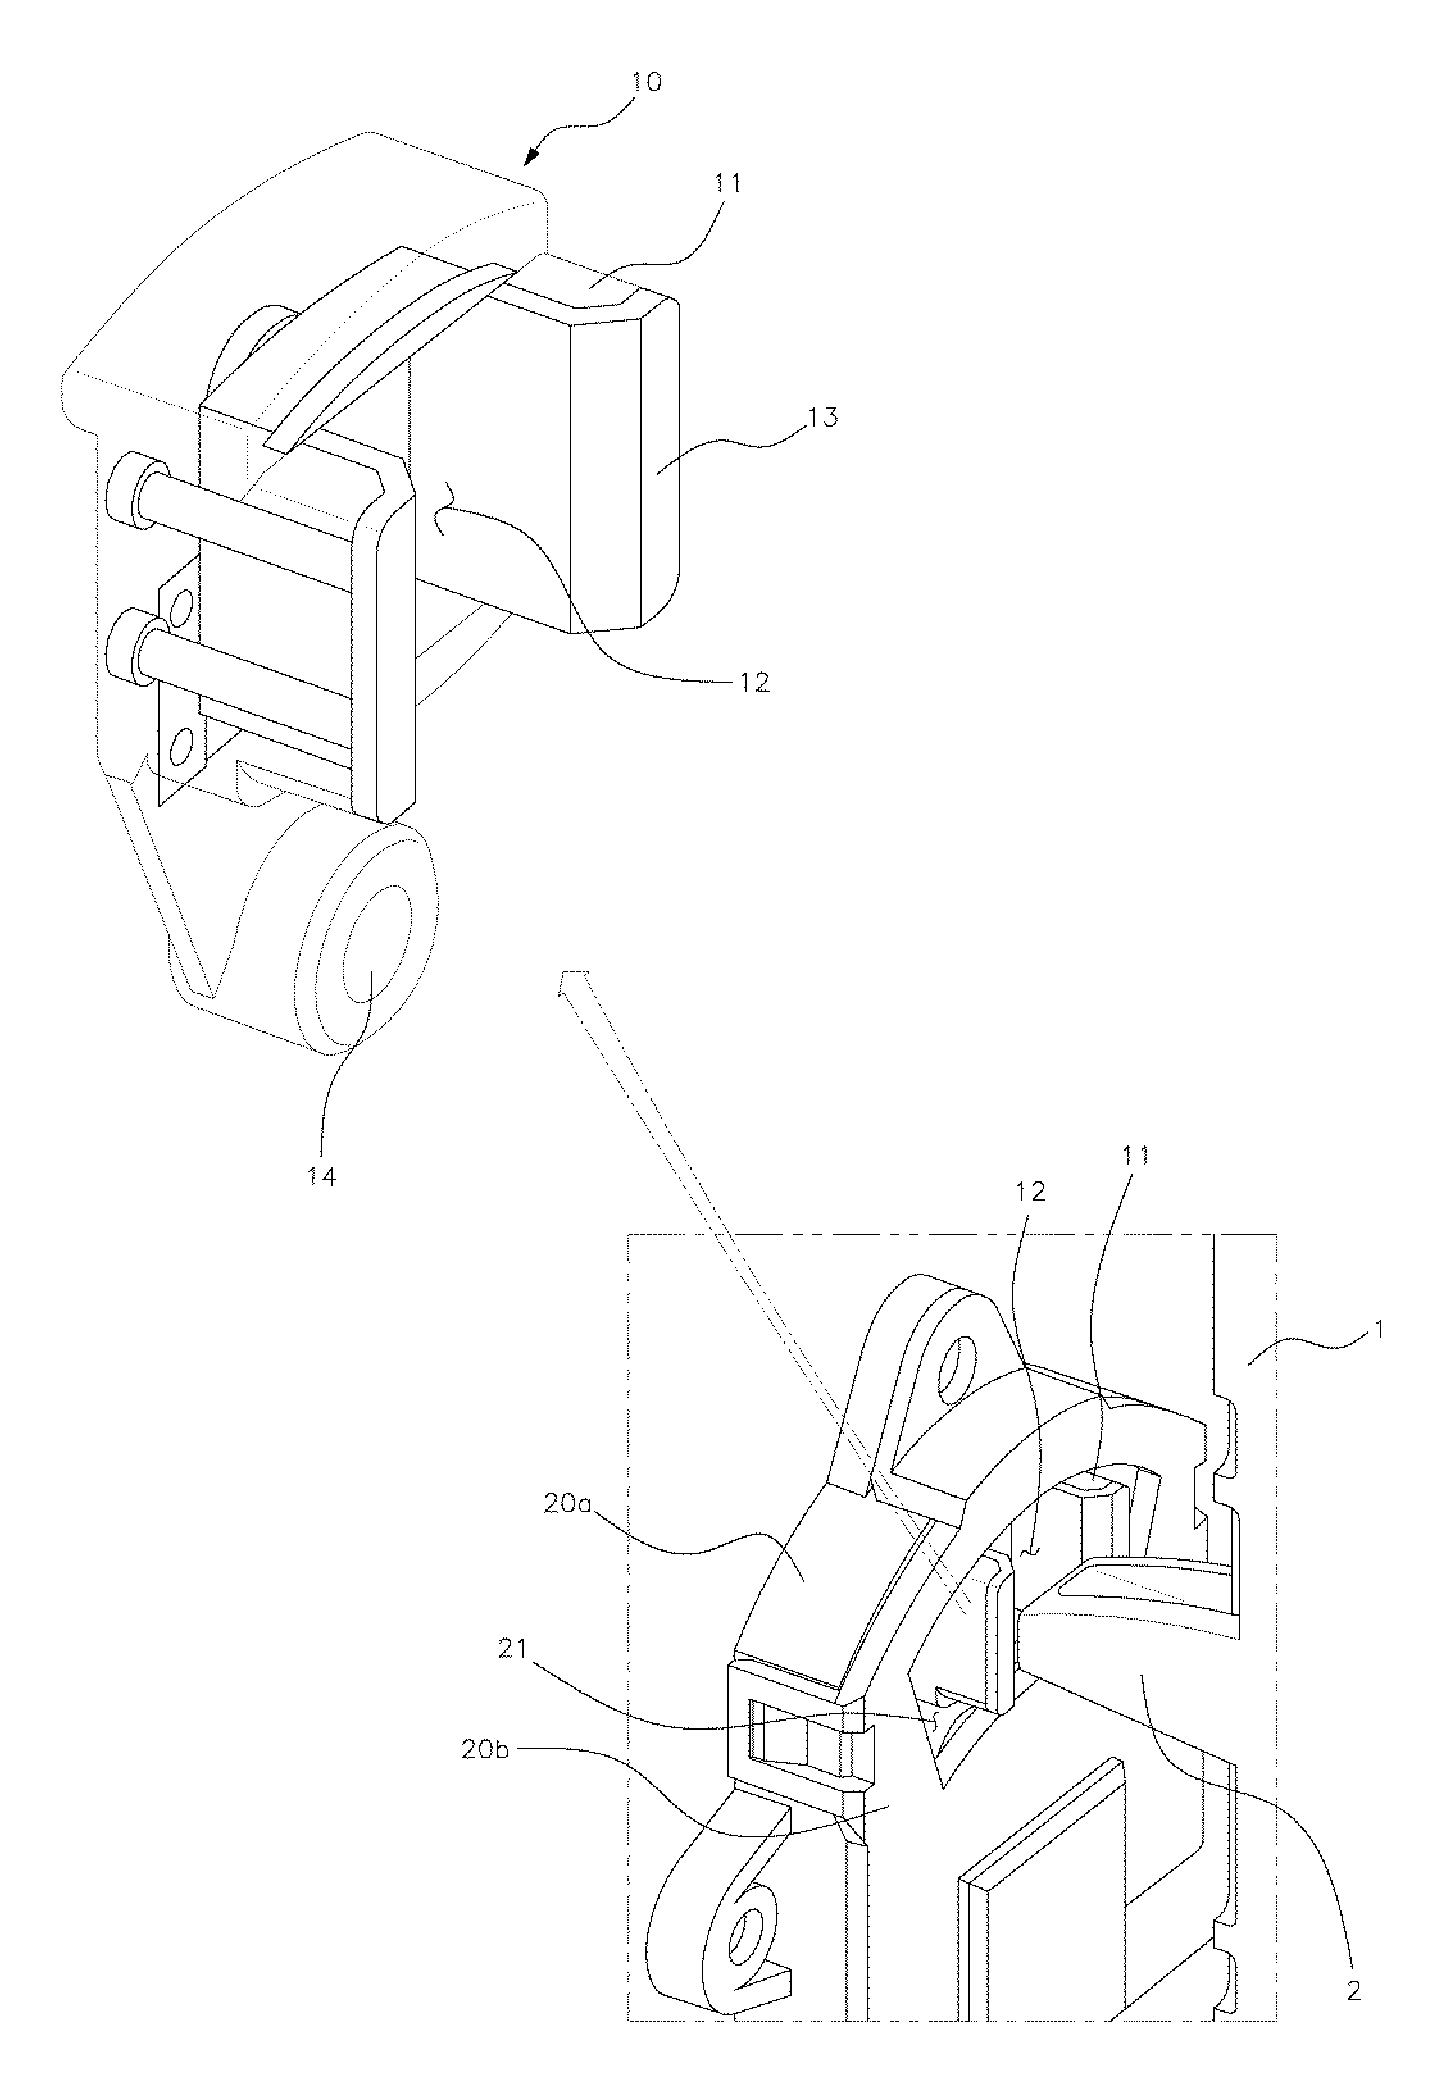 Structure of lever of vehicle transmission